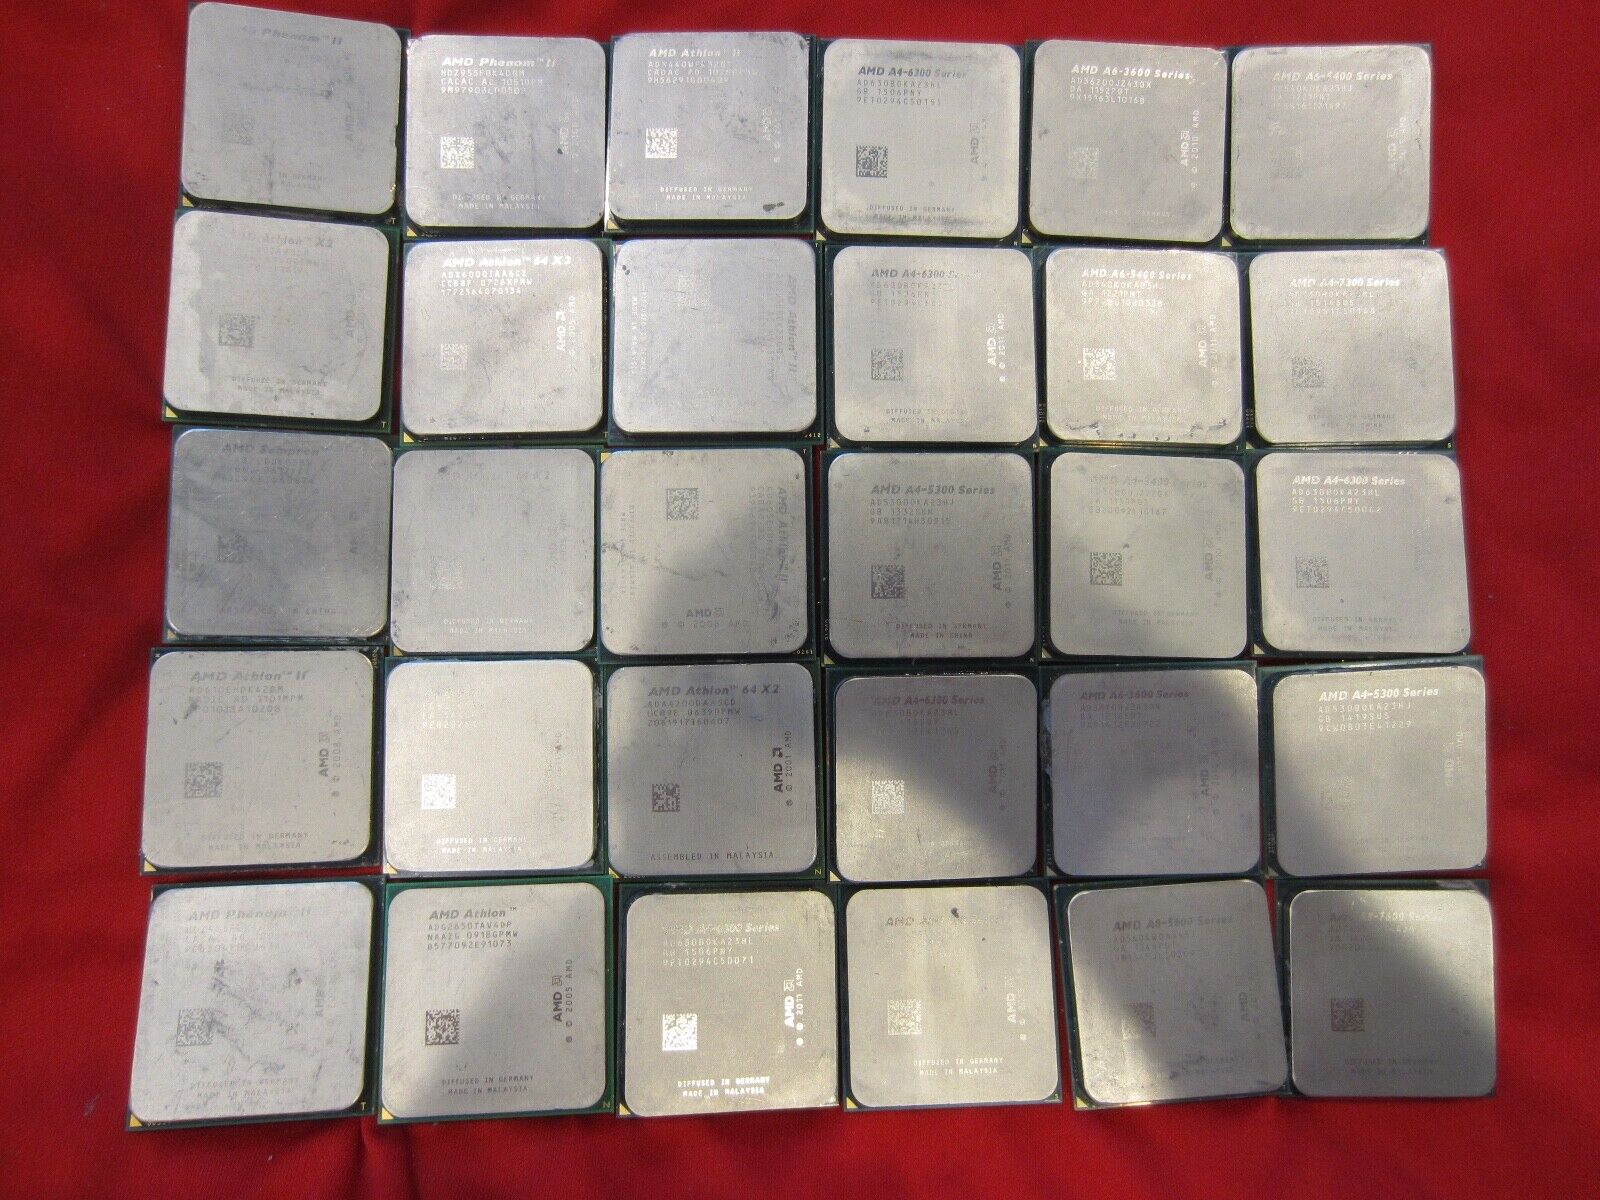 Lot of 30pcs AMD Athlon II,Athlon 64X2,FX,A4,A6,A8 CPU For Scrap Gold Recovery